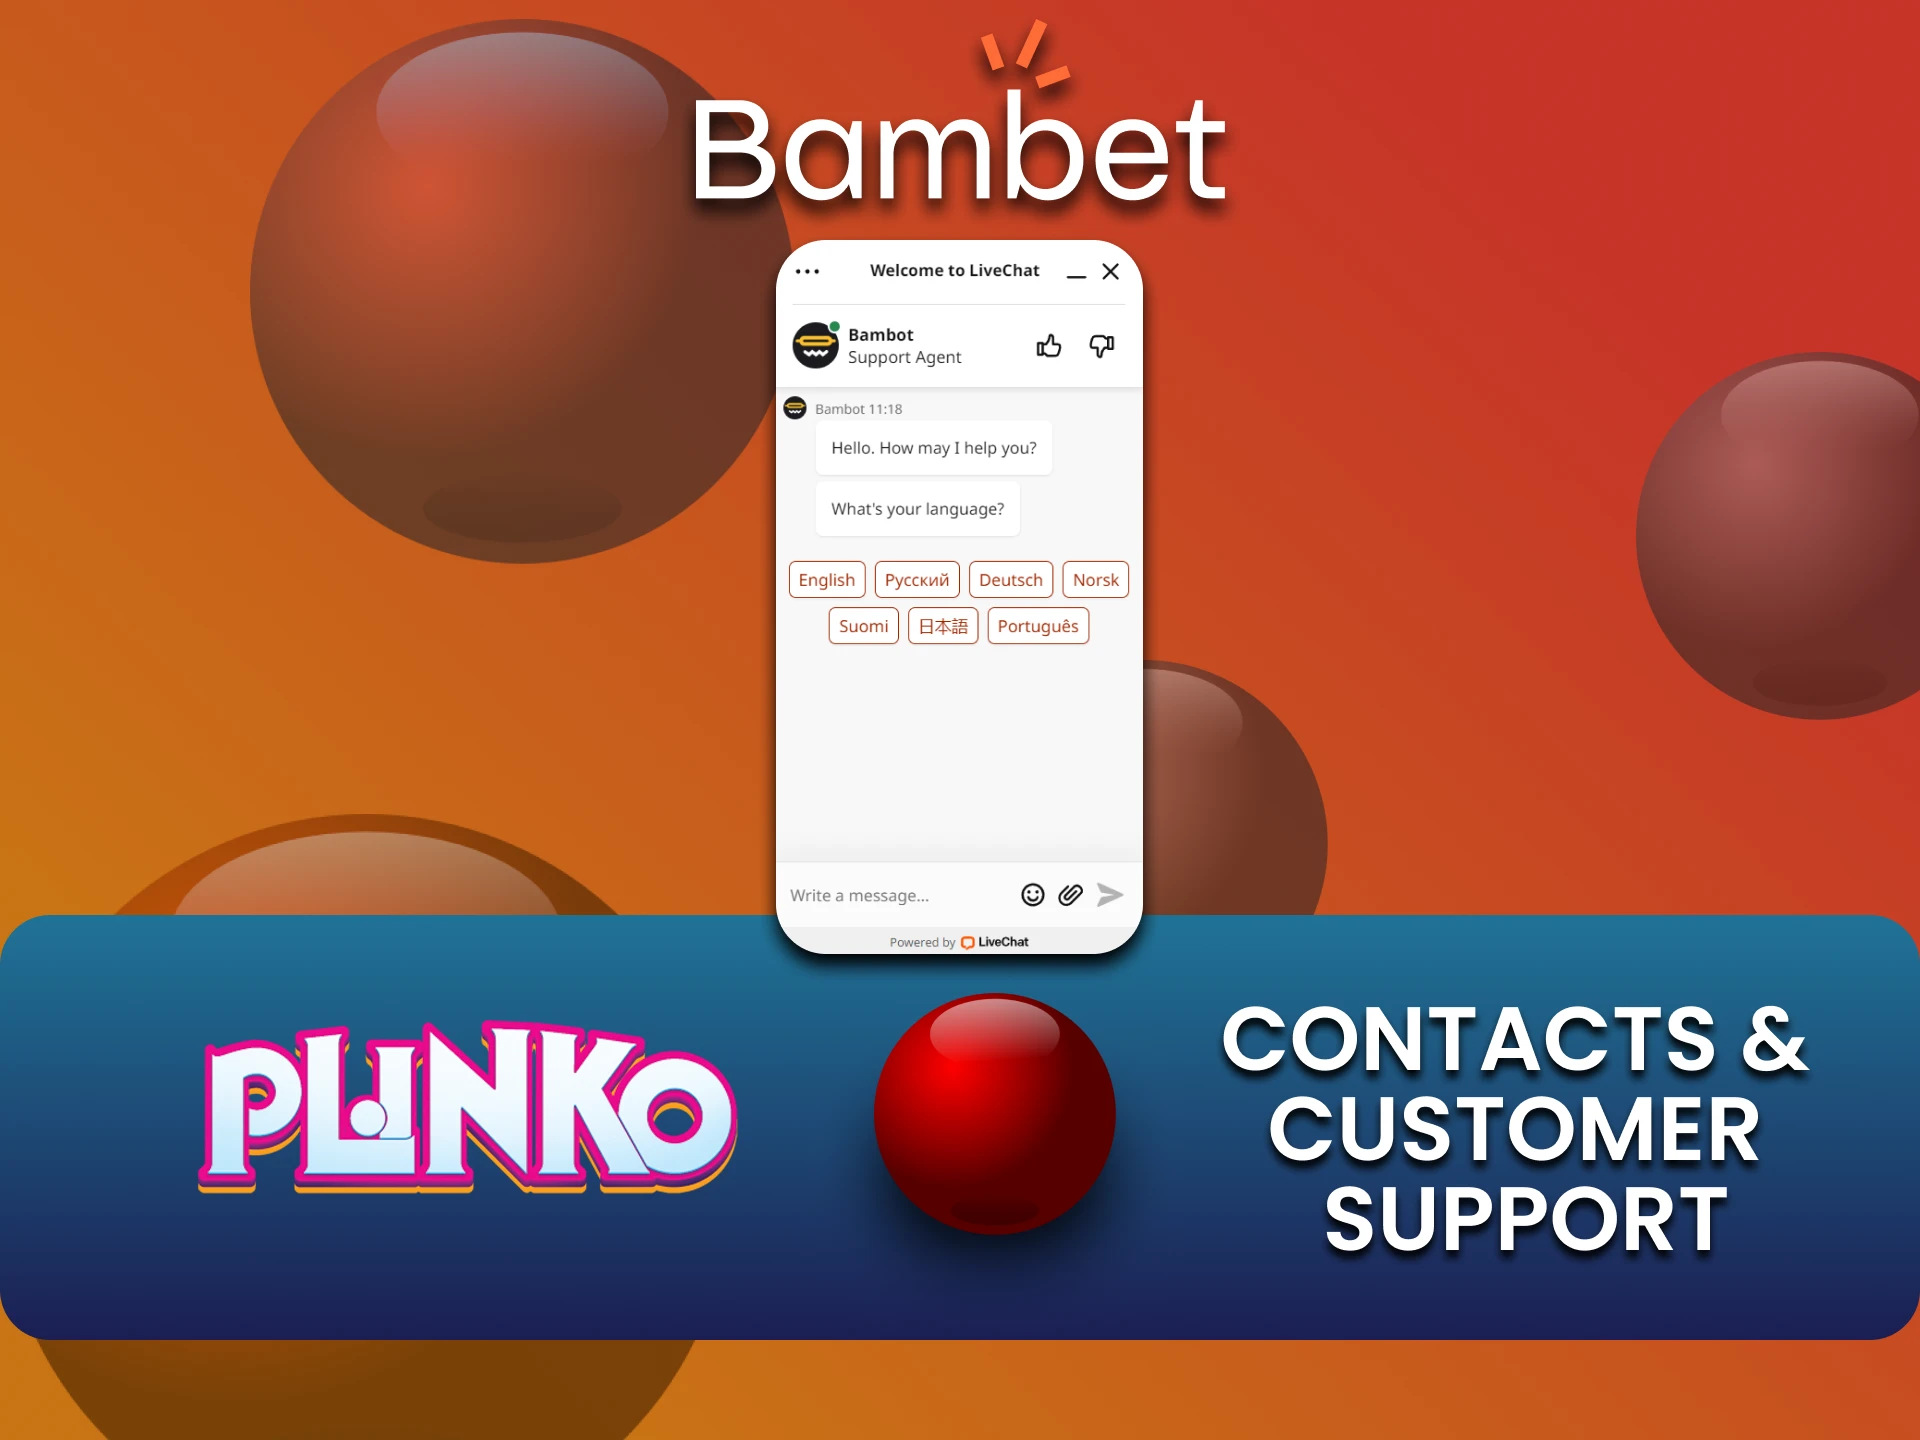 Find out how to contact the Bambet team.